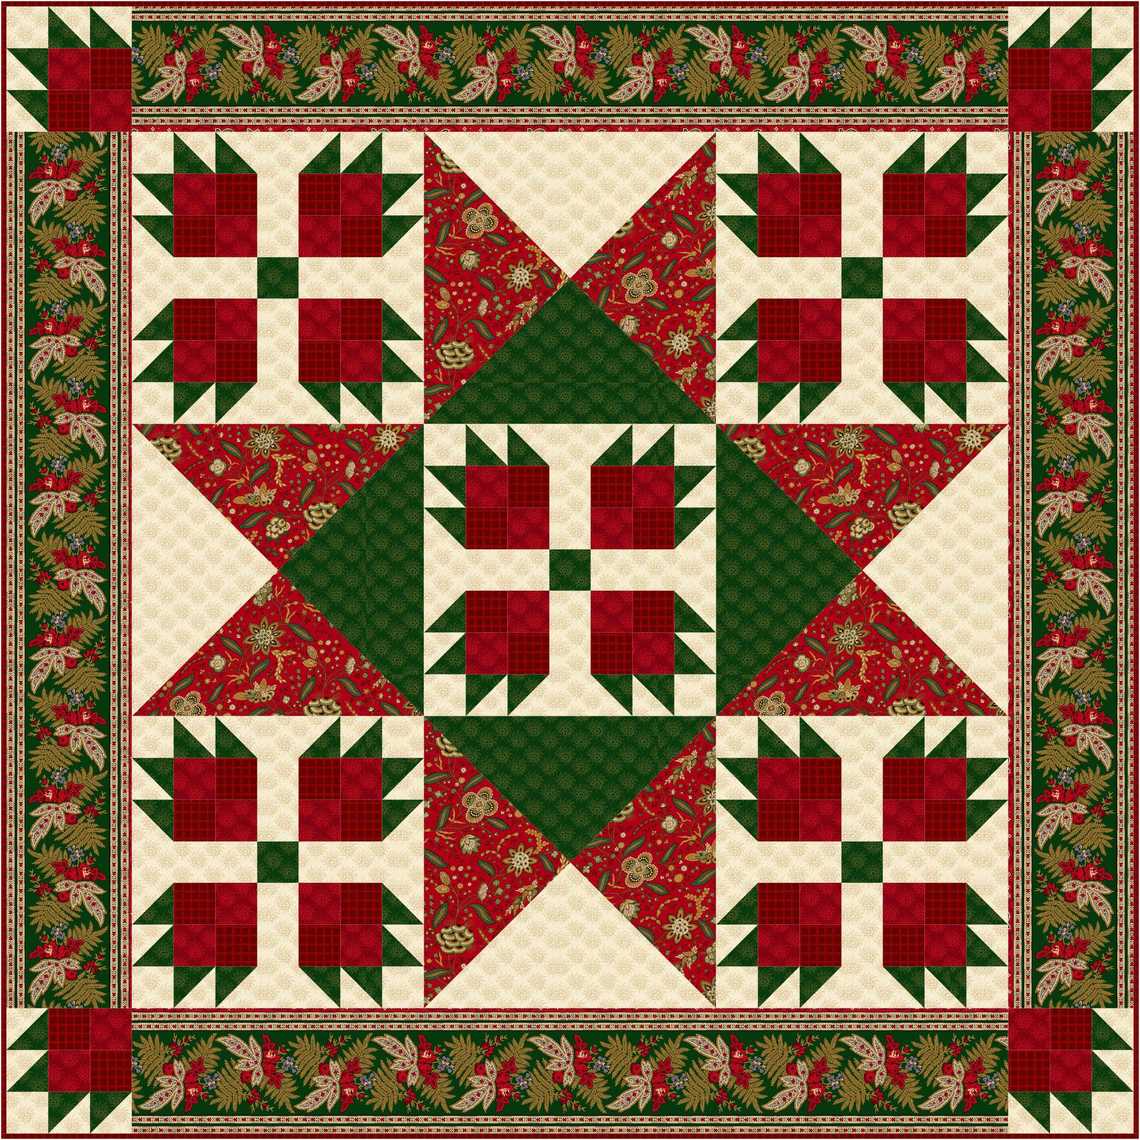 Quilt Patterns: #108 Christmas Paws pattern